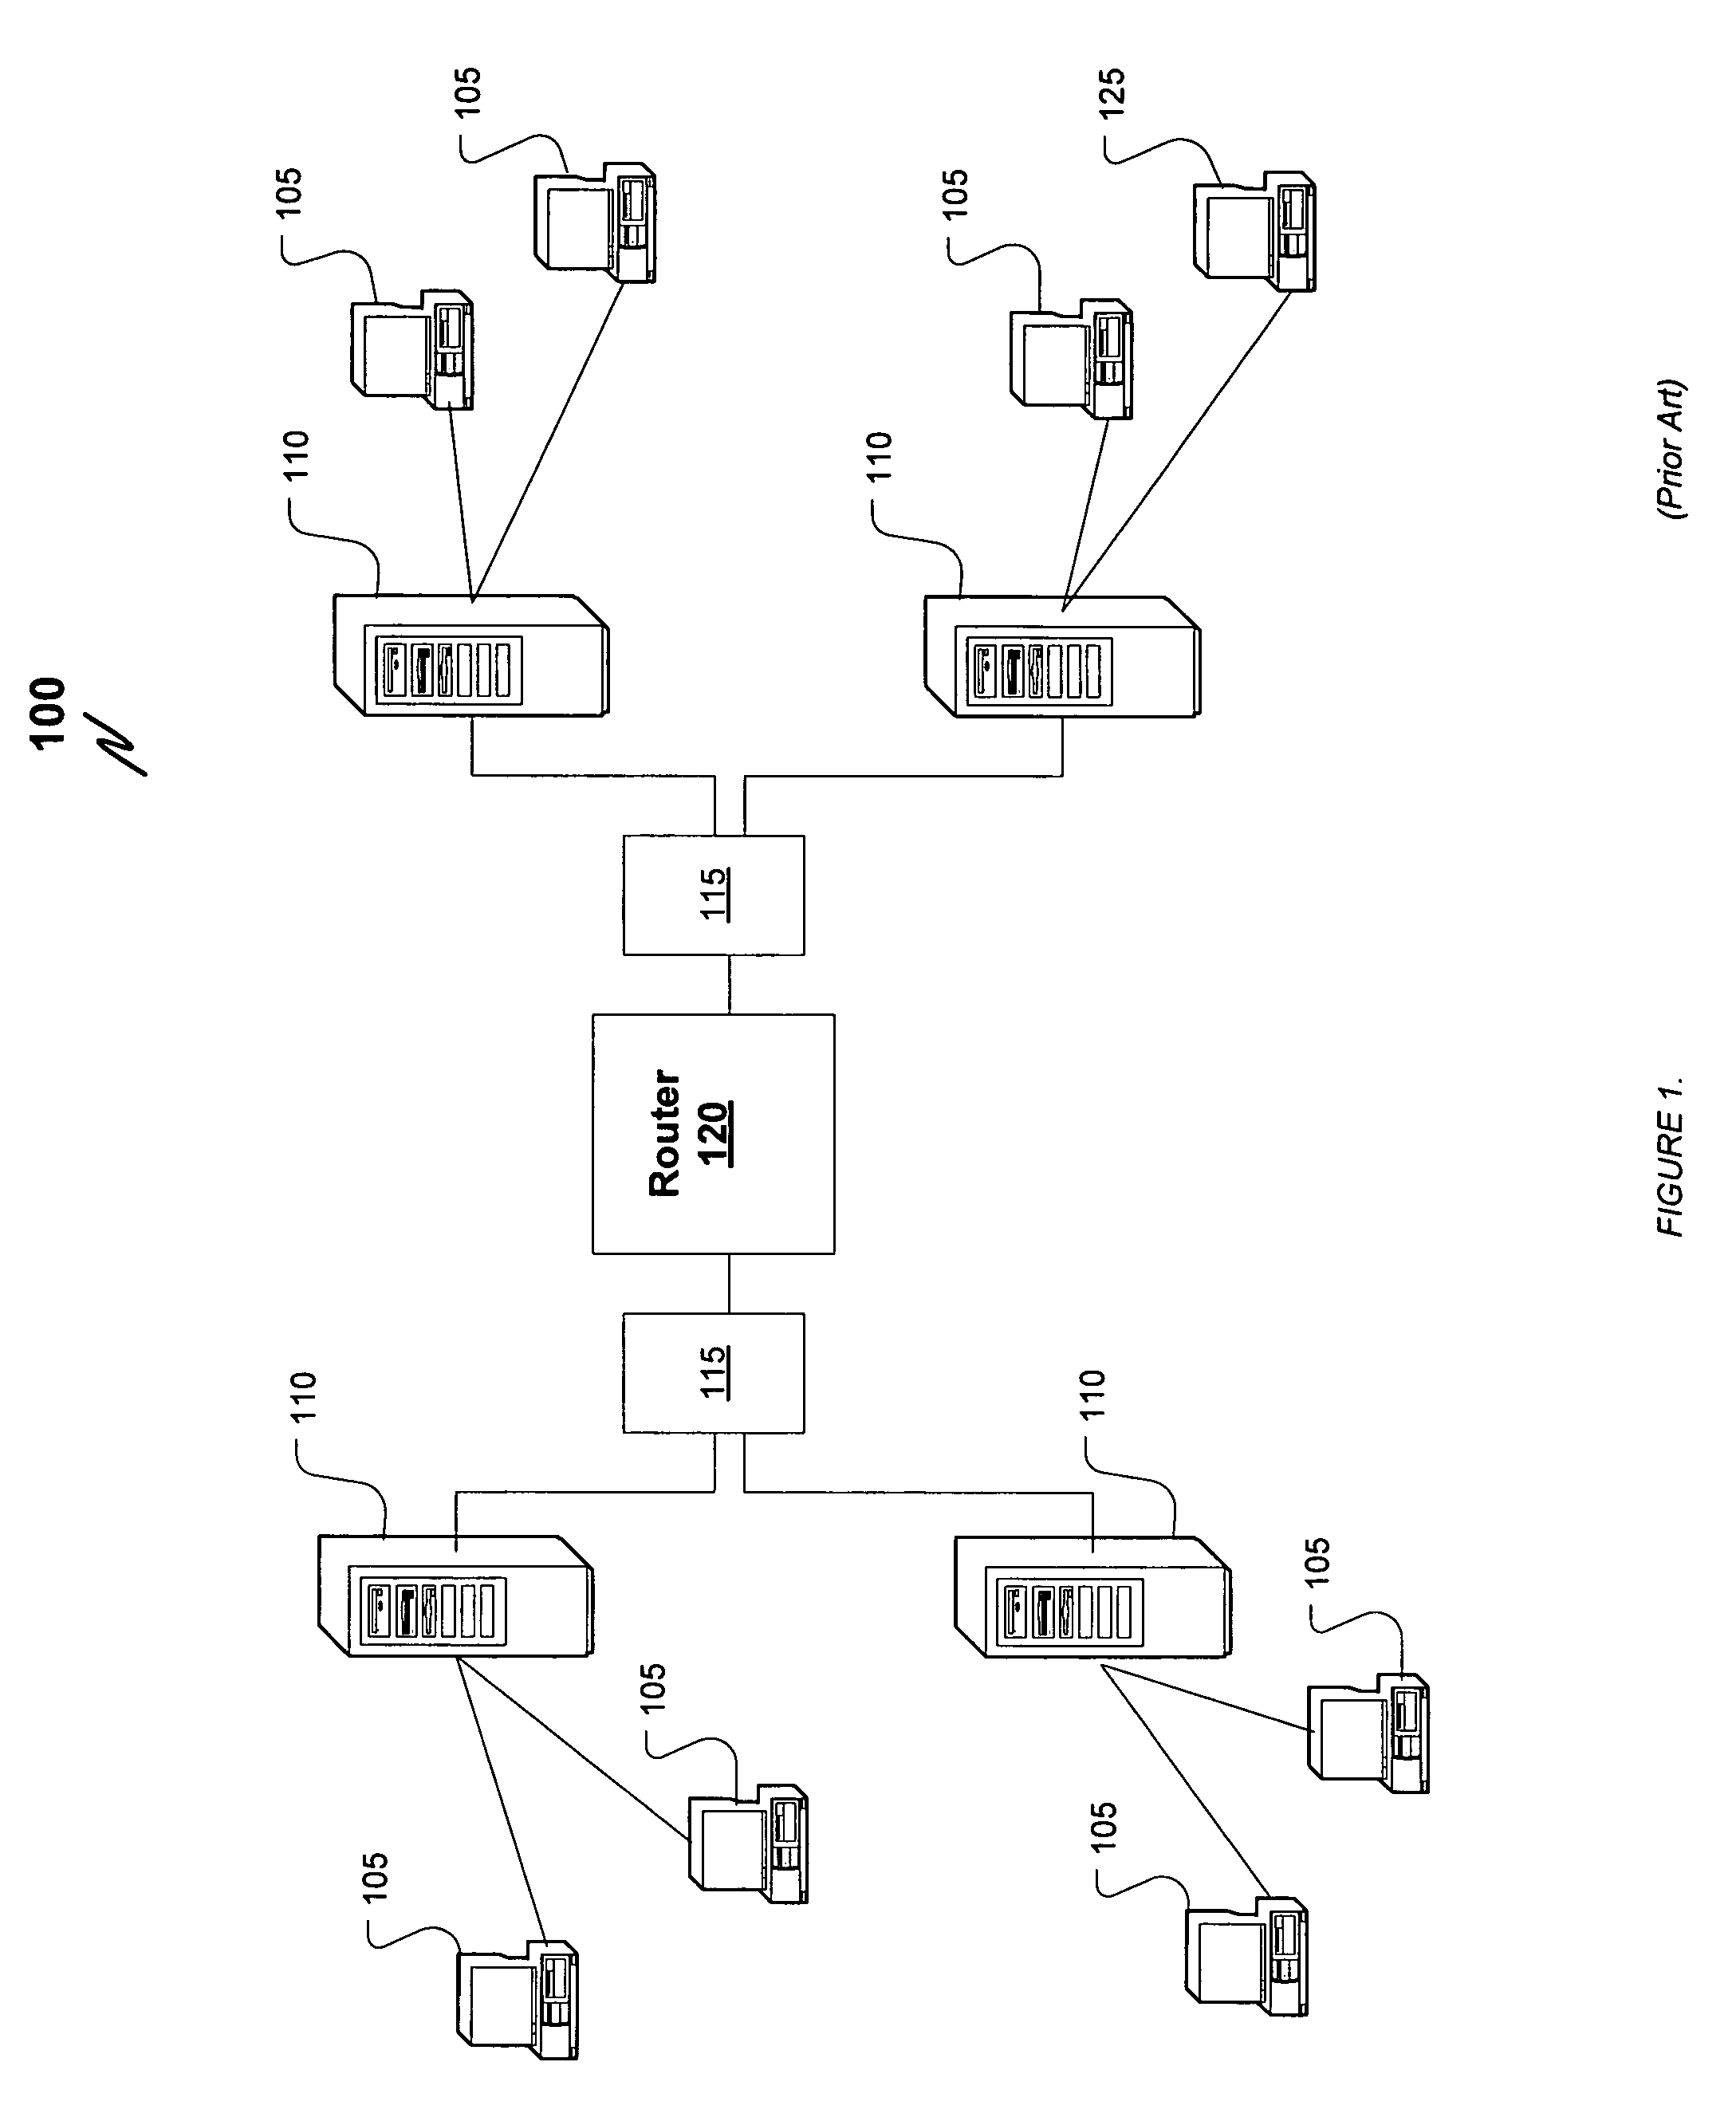 System and method for generating a representation of a configuration schema